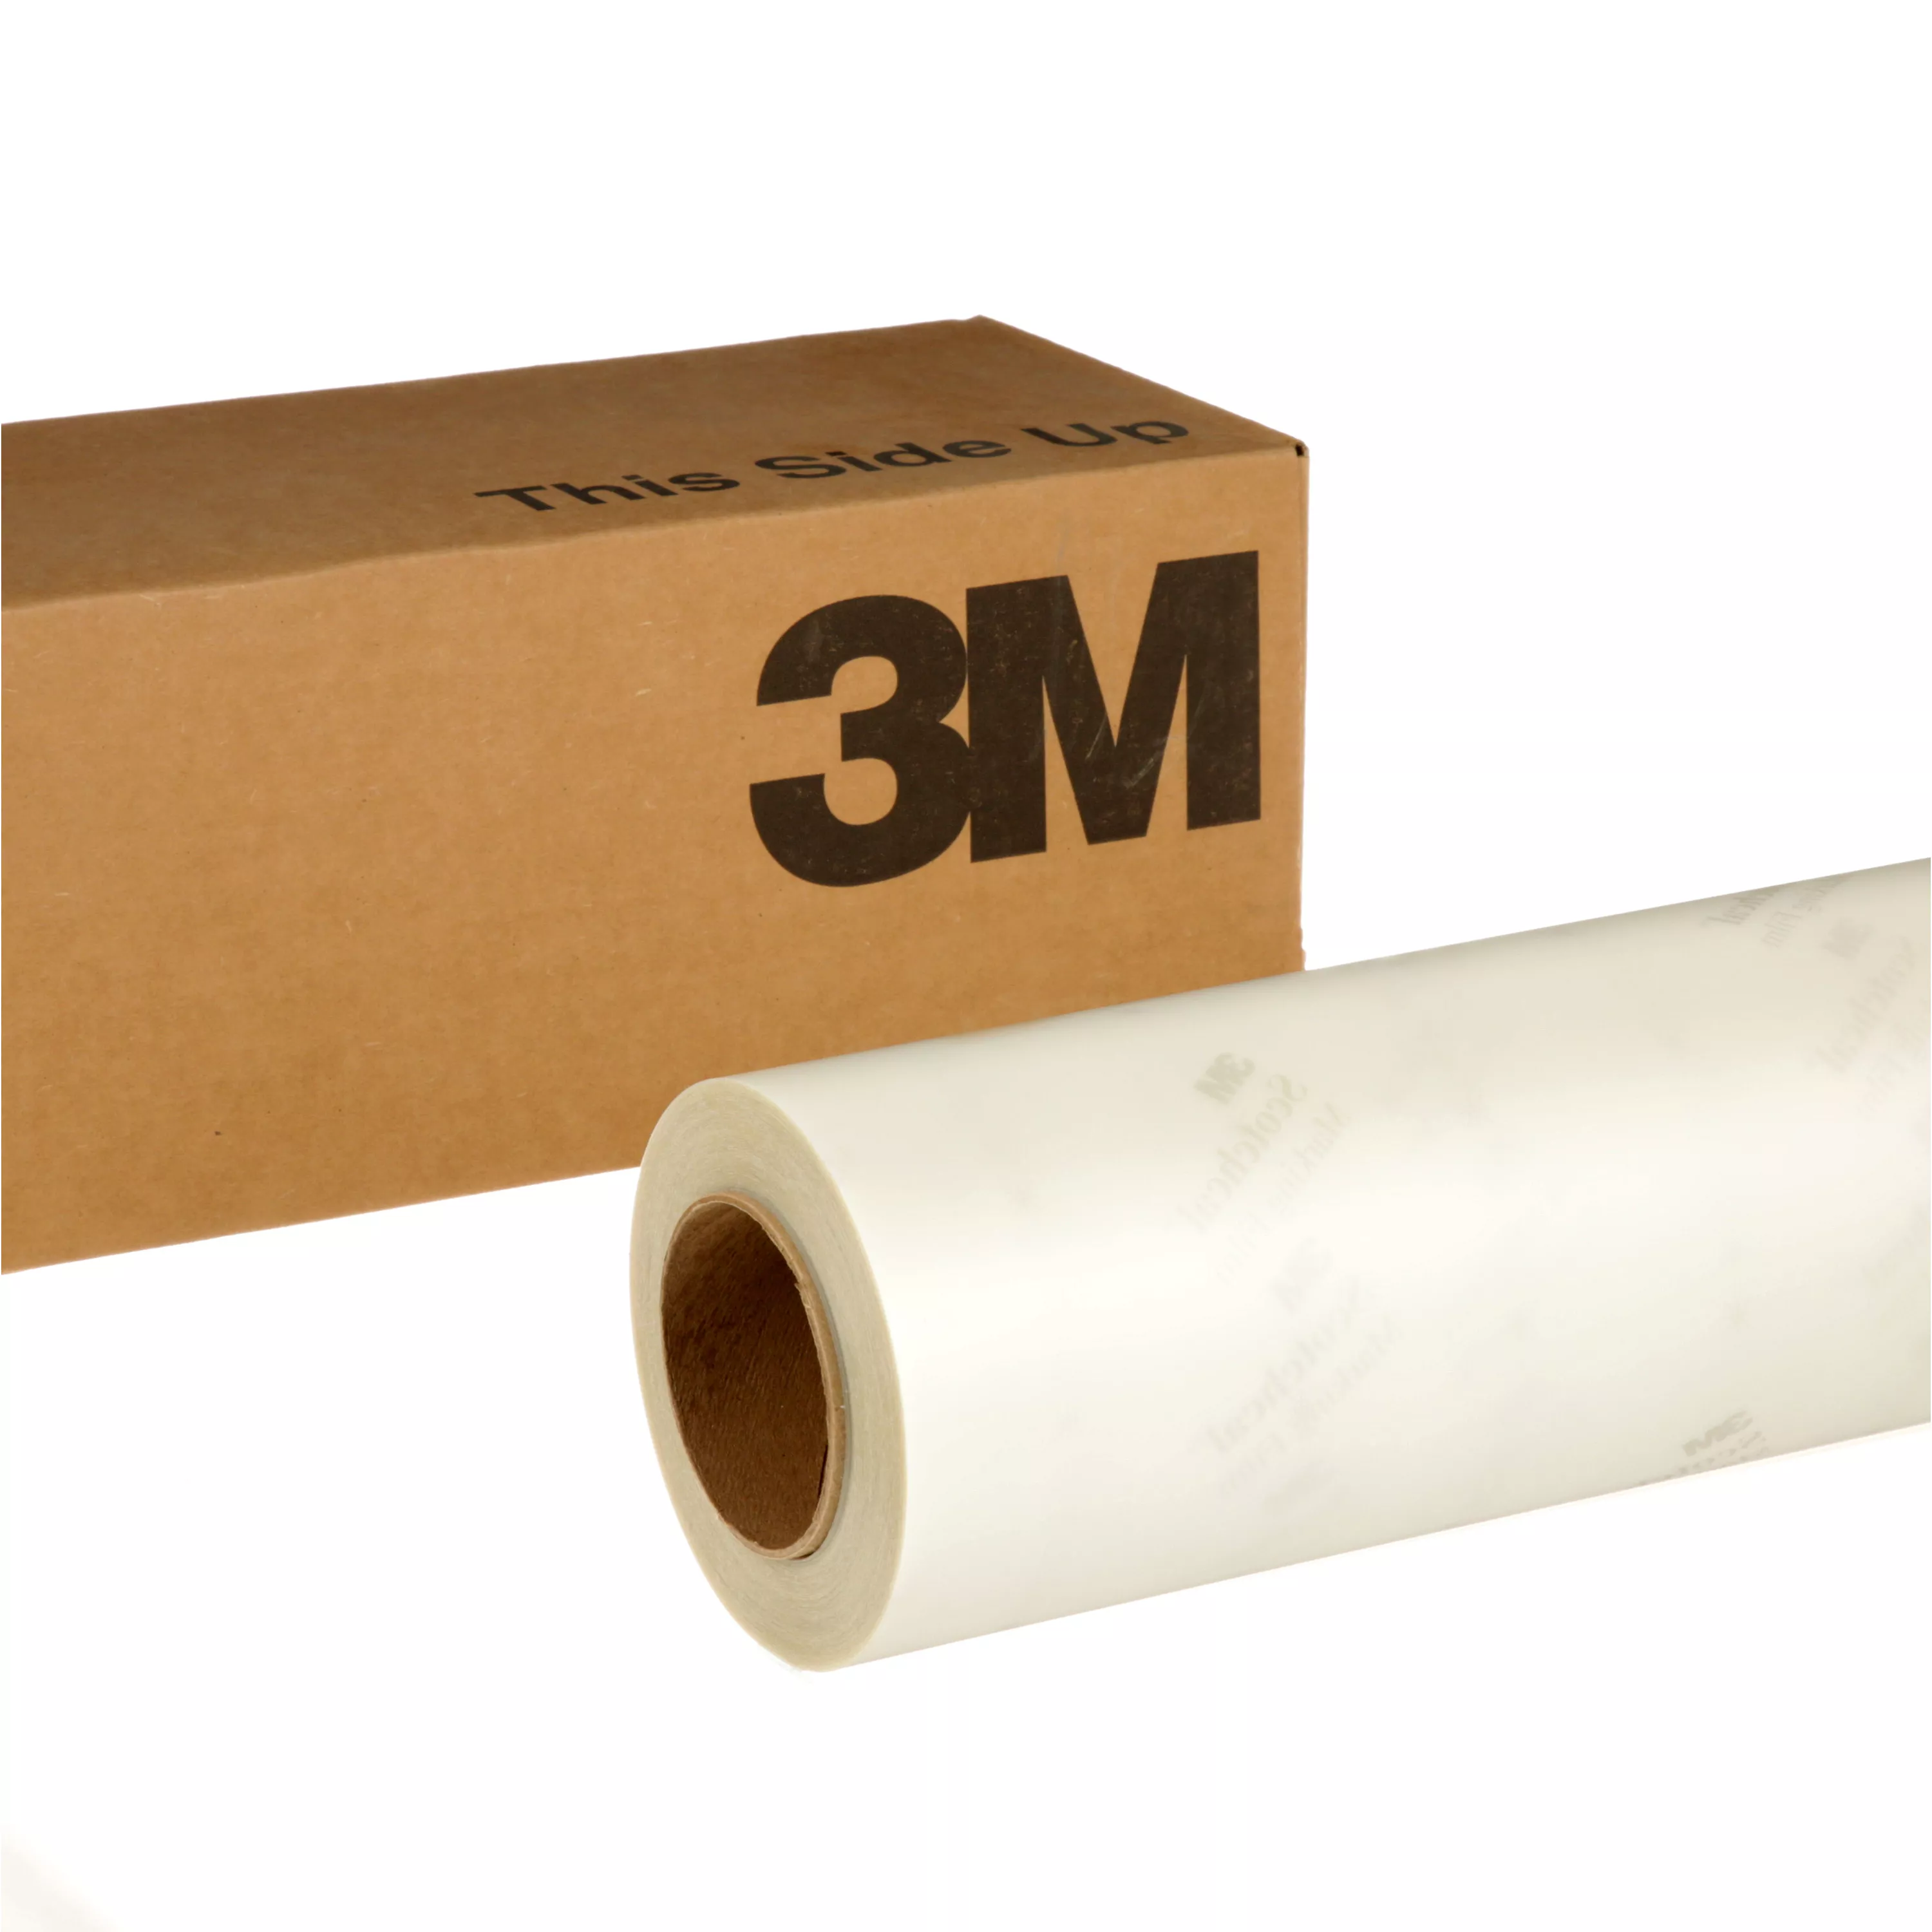 3M™ Scotchcal™ ElectroCut™ Graphic Film 7725SE-314, Dusted Crystal, 36
in x 50 yd, 1 Roll/Case